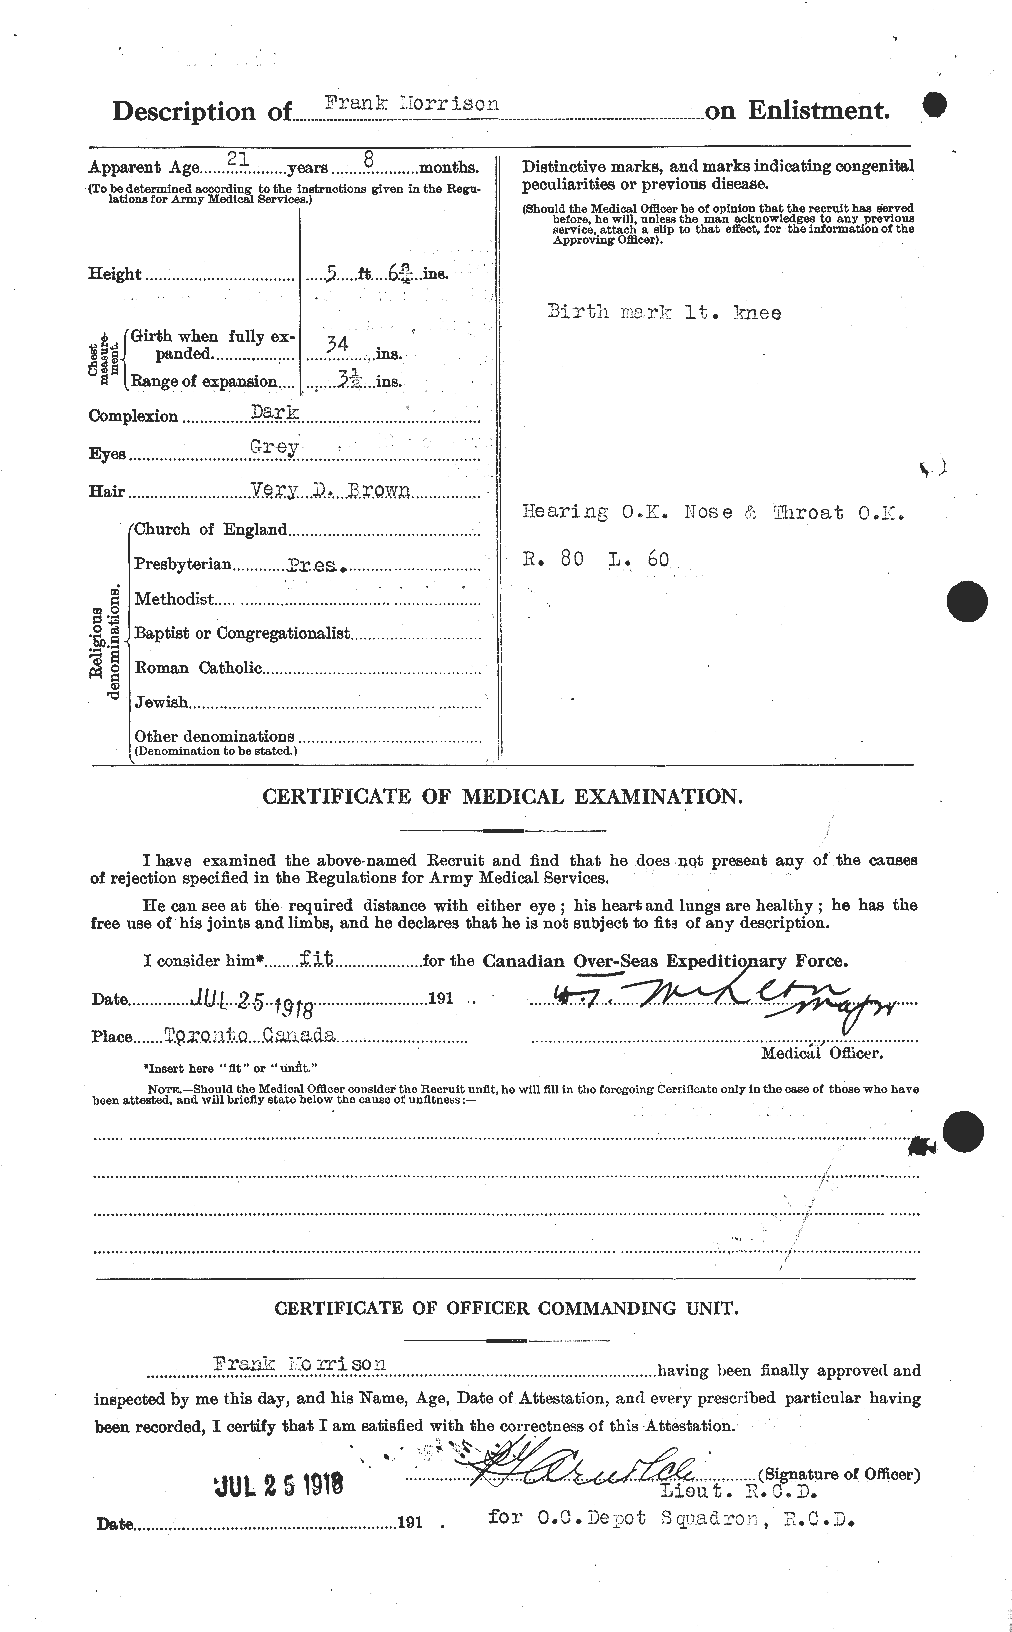 Personnel Records of the First World War - CEF 505541b